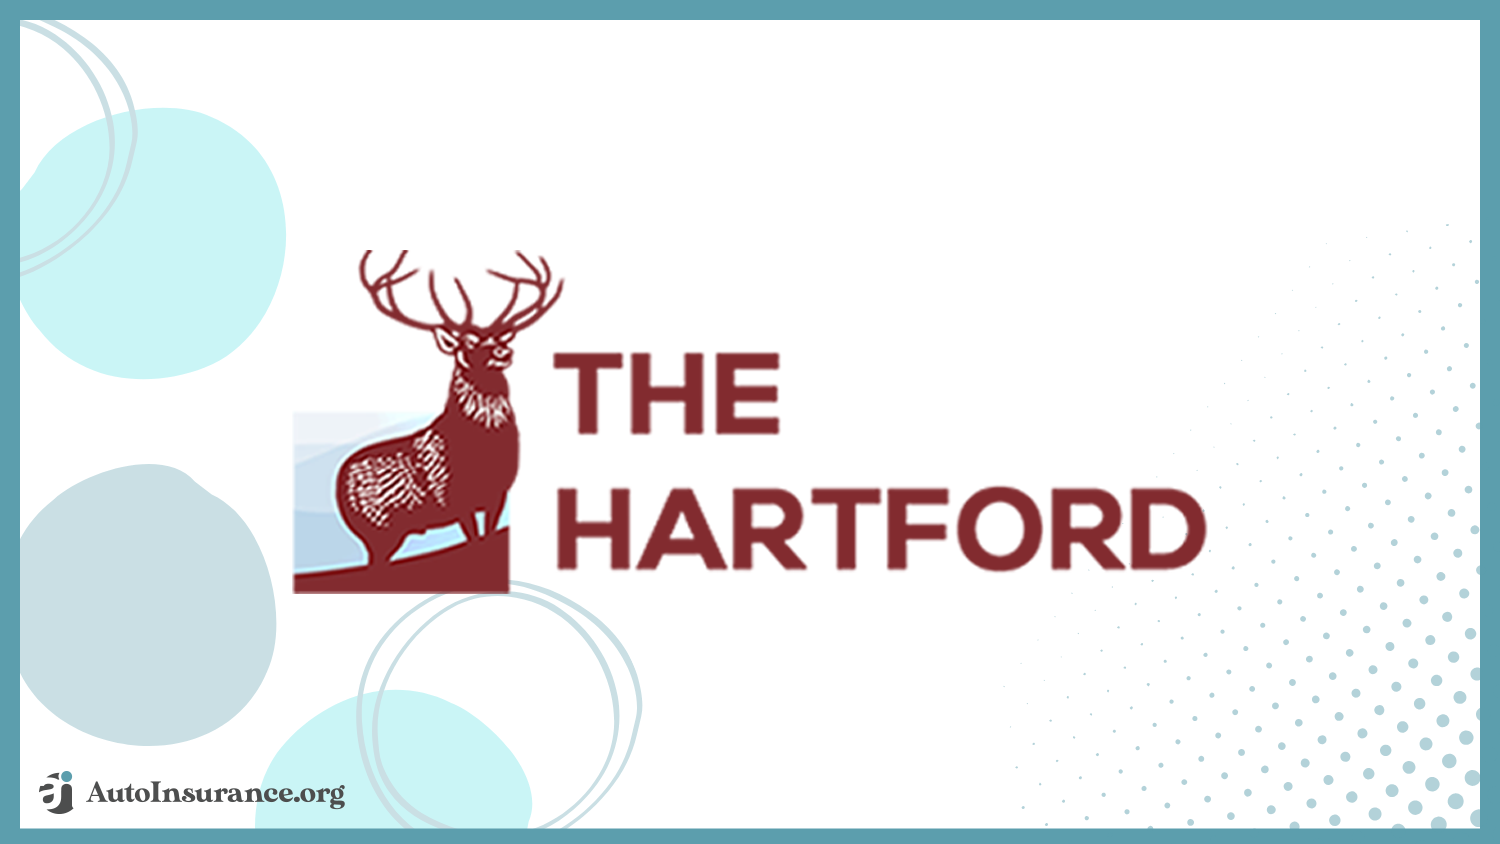 The Hartford: Best Auto Insurance Companies for Women